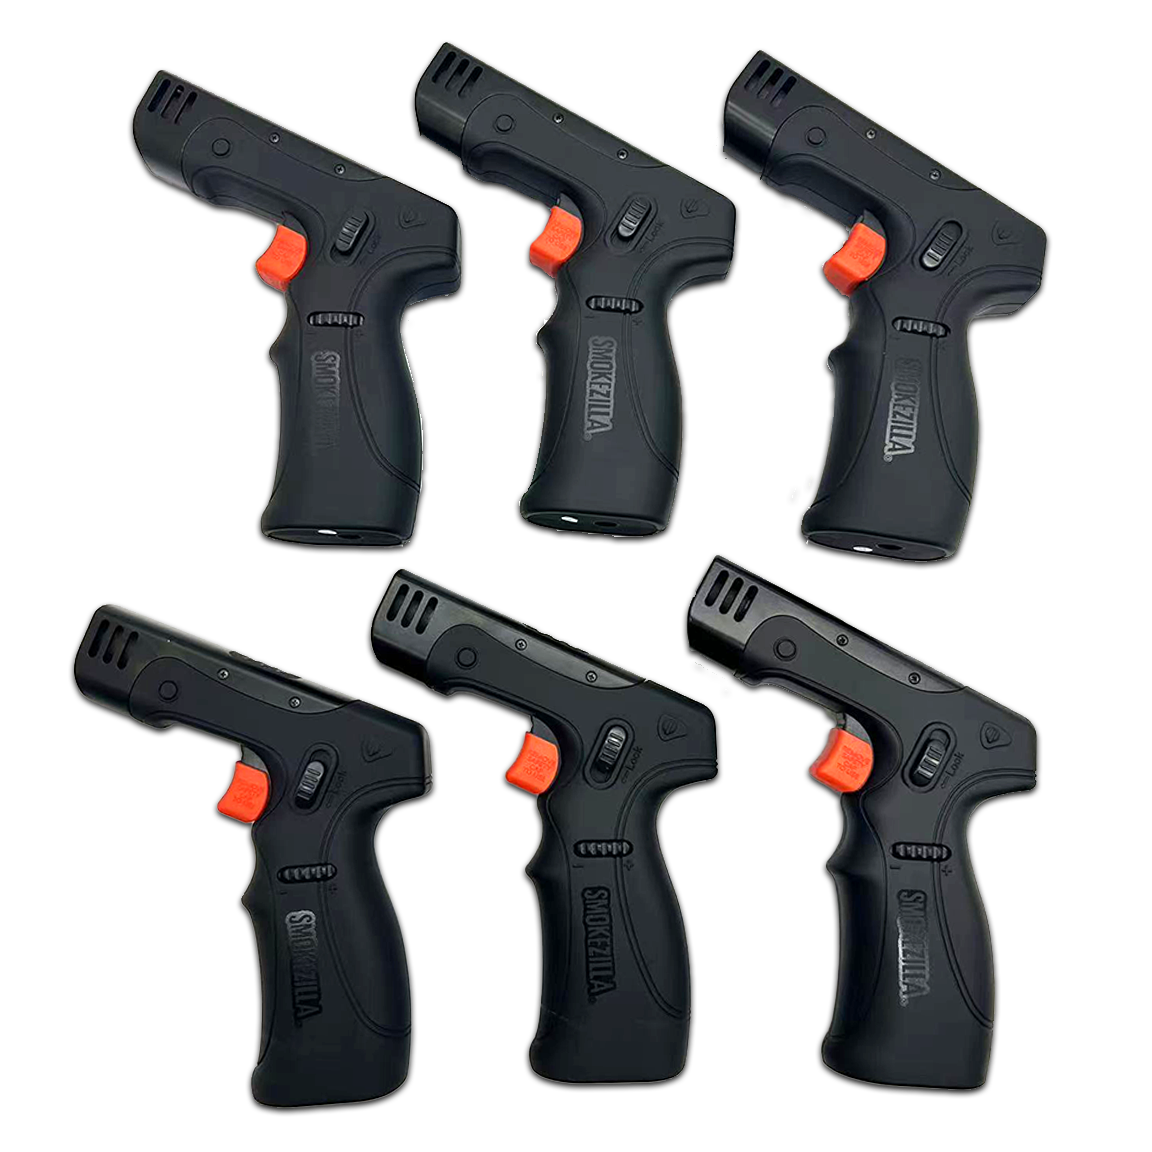 ITEM NUMBER 023541L TRIGGER TORCH LIGHTER - STORE SURPLUS NO DISPLAY 6 PIECES PER PACK